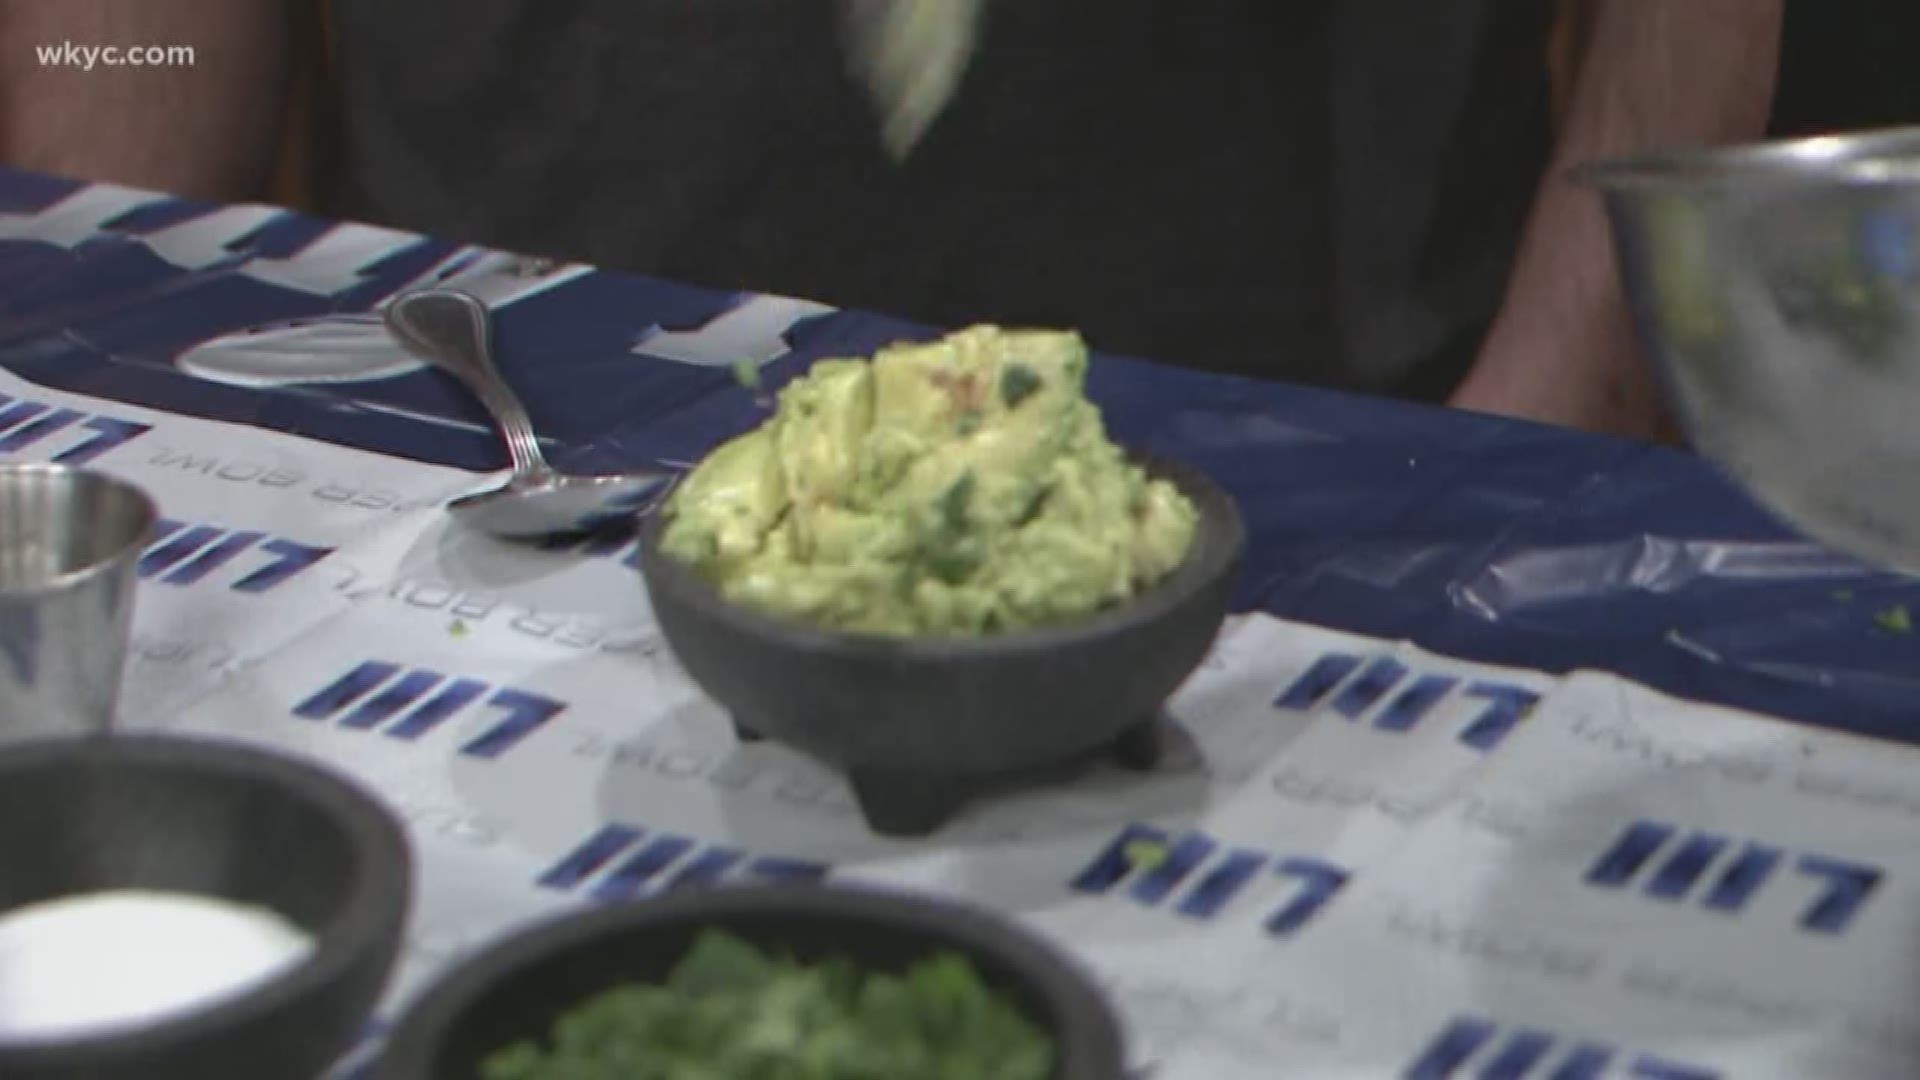 Feb. 1, 2019: Looking to have the perfect guacamole for the Super Bowl? We brought in the experts... Chef George Matos of Paladar Latin Kitchen and Chef Frank Mineo of BOMBA Tacos & Rum show us the best ways to make guacamole.